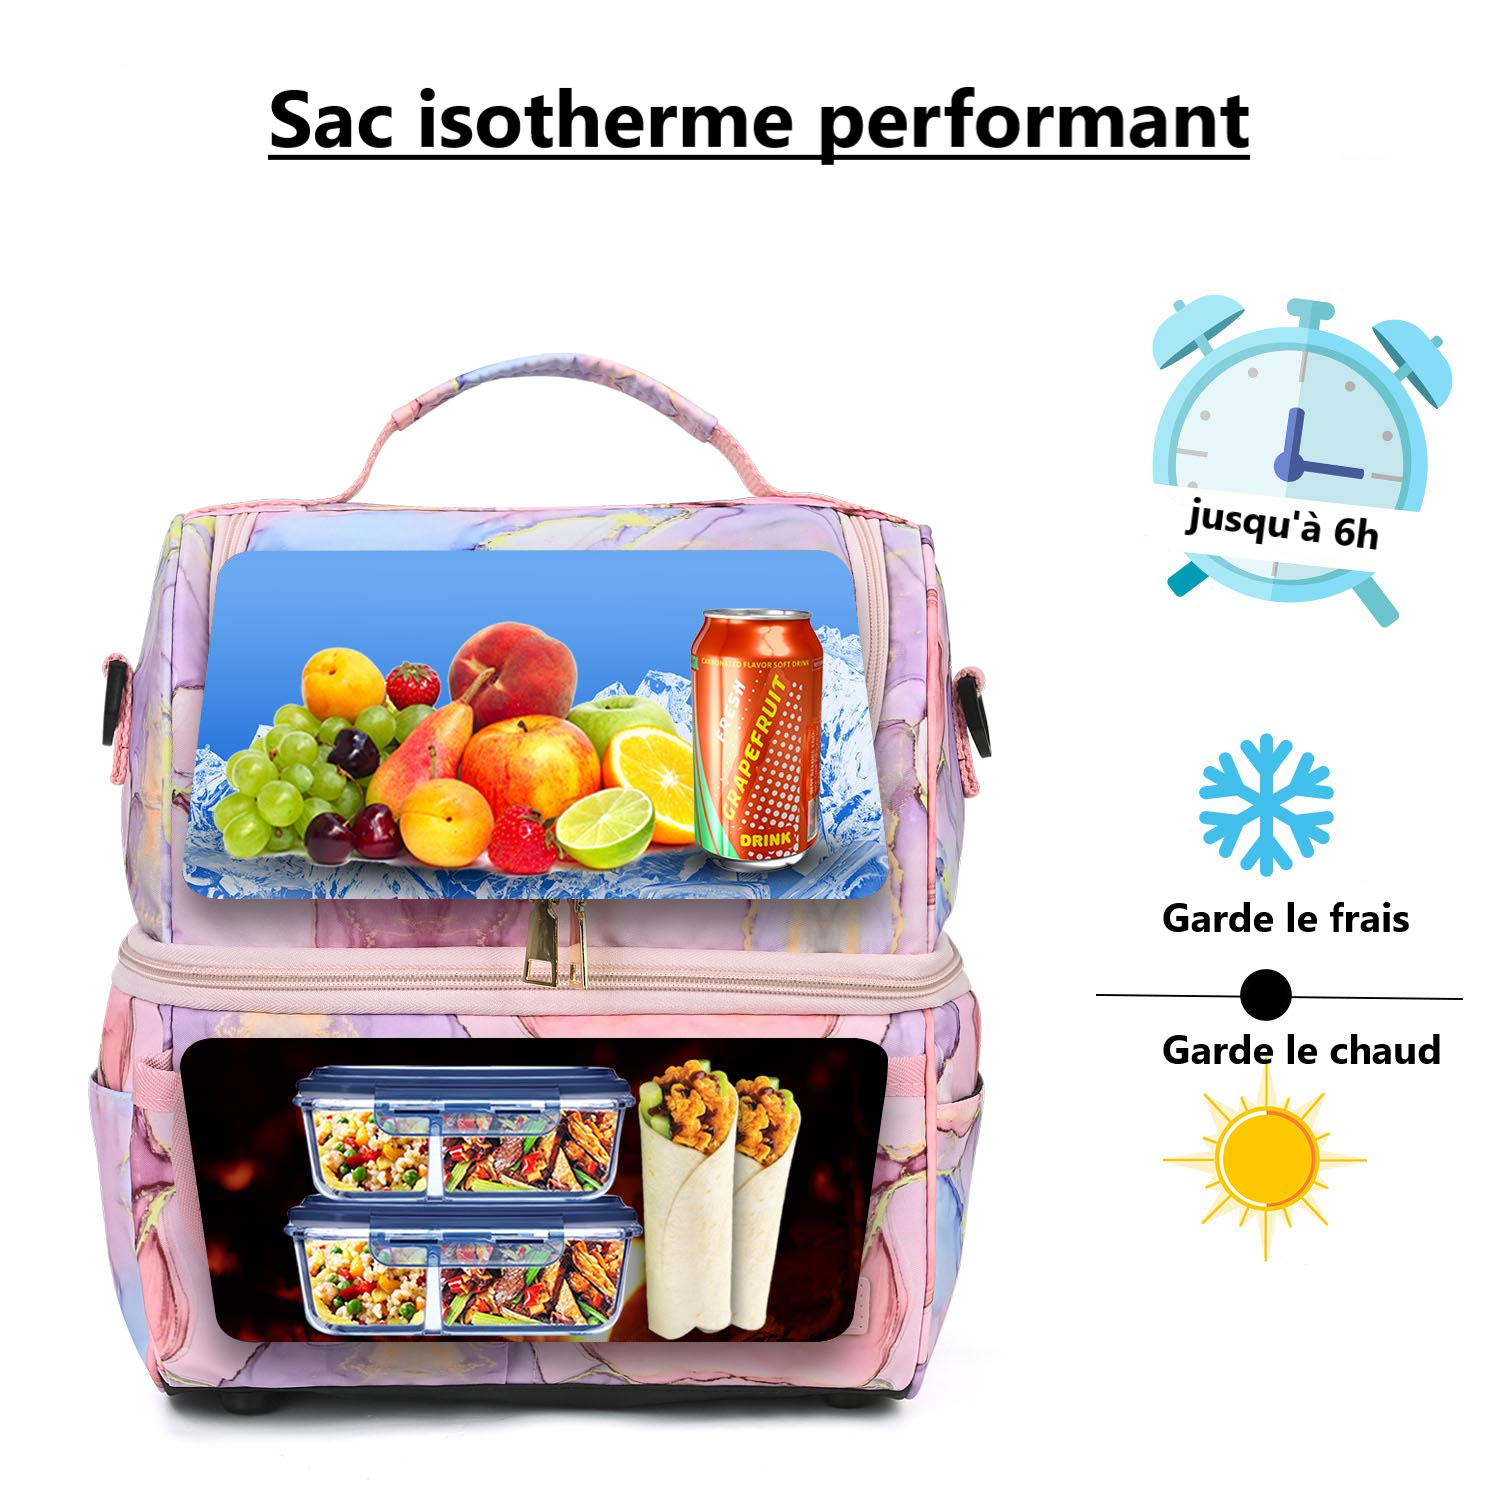 performance thermique grand sac isotherme longue duree